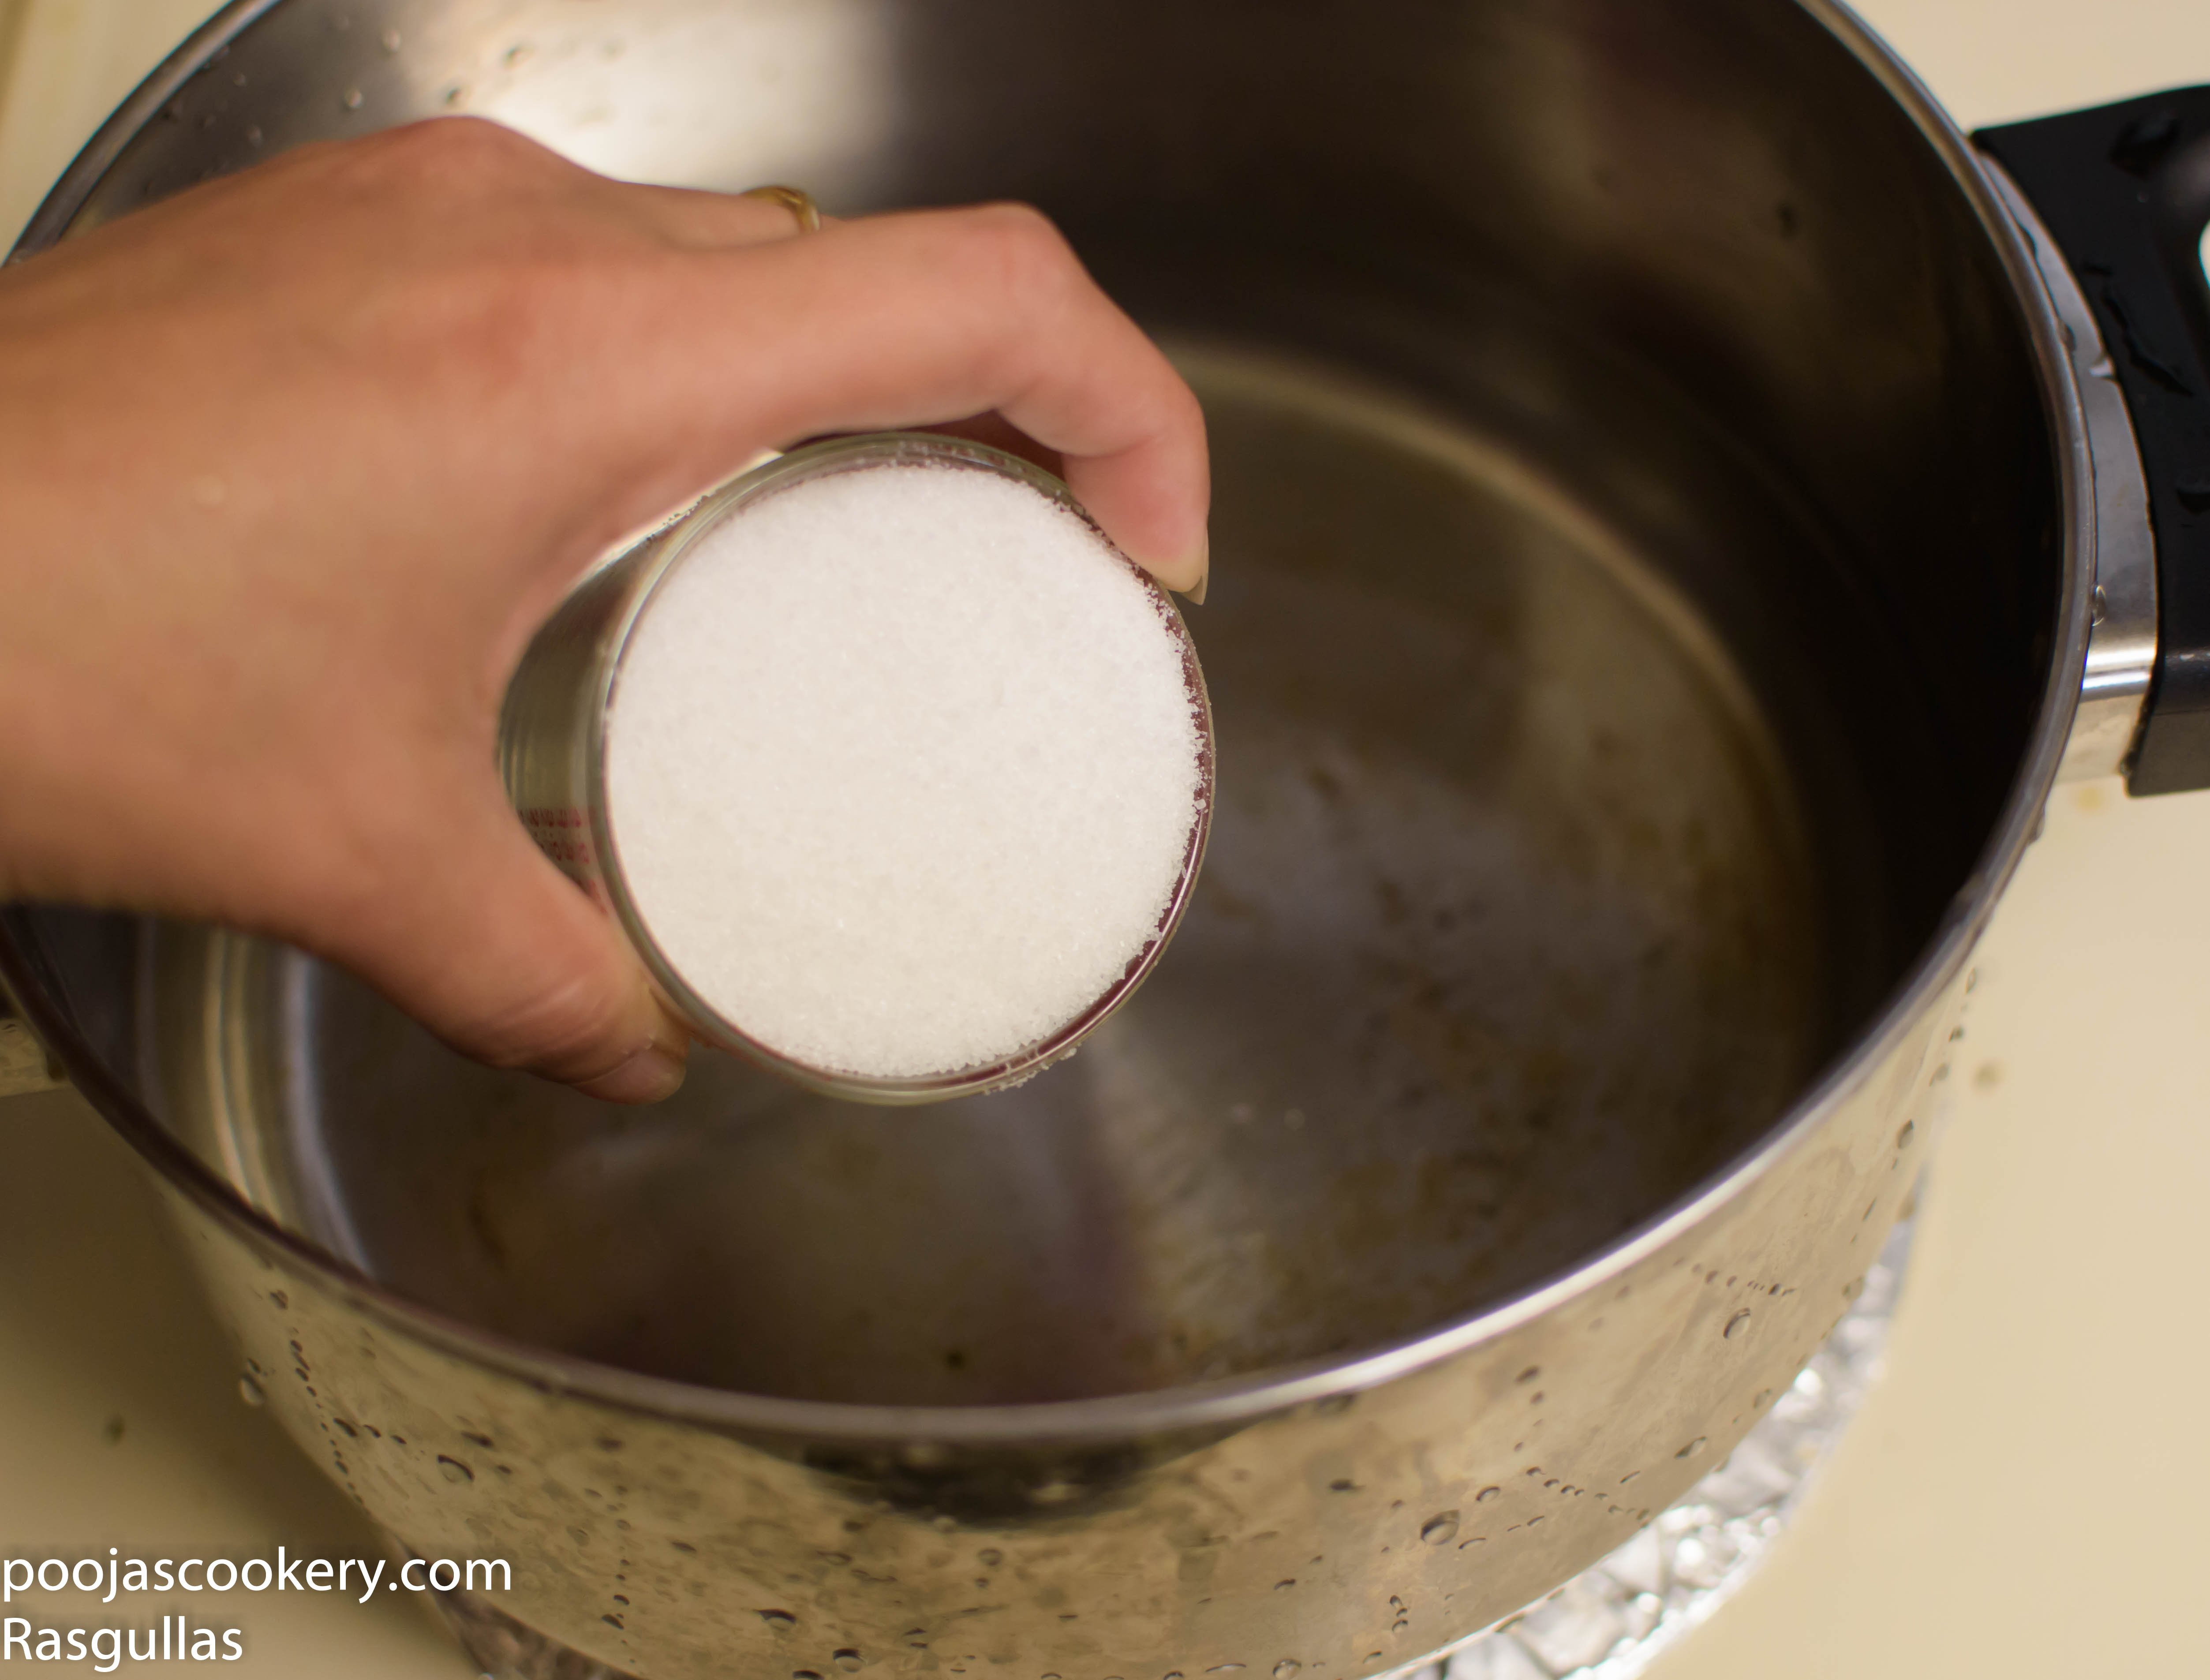 Sugar added in water to prepare syrup